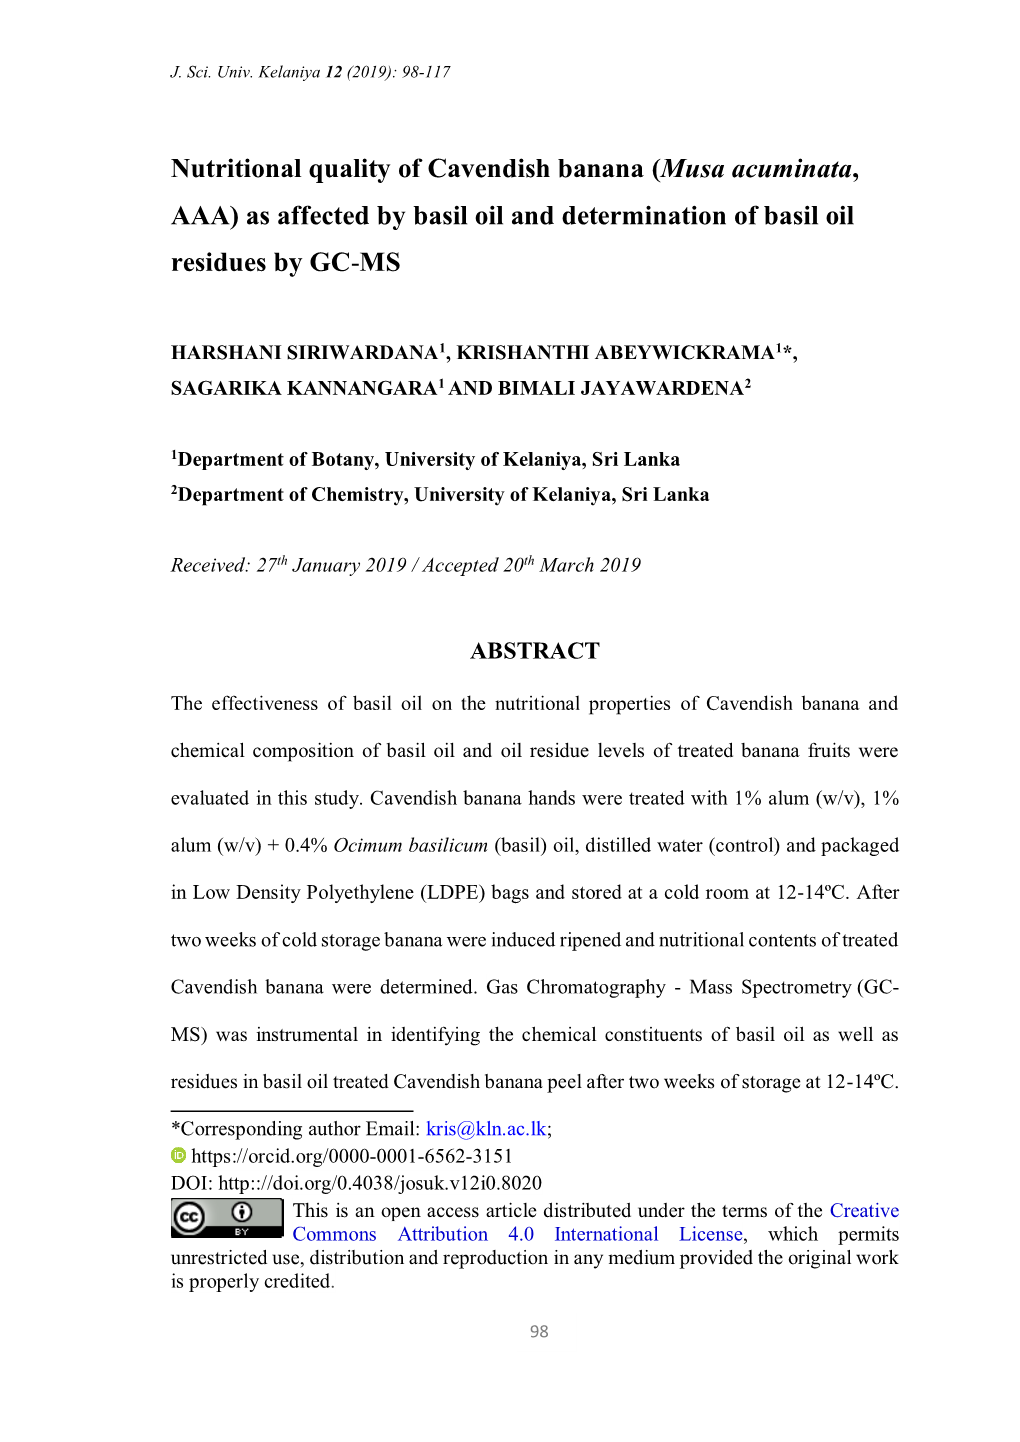 Nutritional Quality of Cavendish Banana (Musa Acuminata, AAA) As Affected by Basil Oil and Determination of Basil Oil Residues by GC-MS